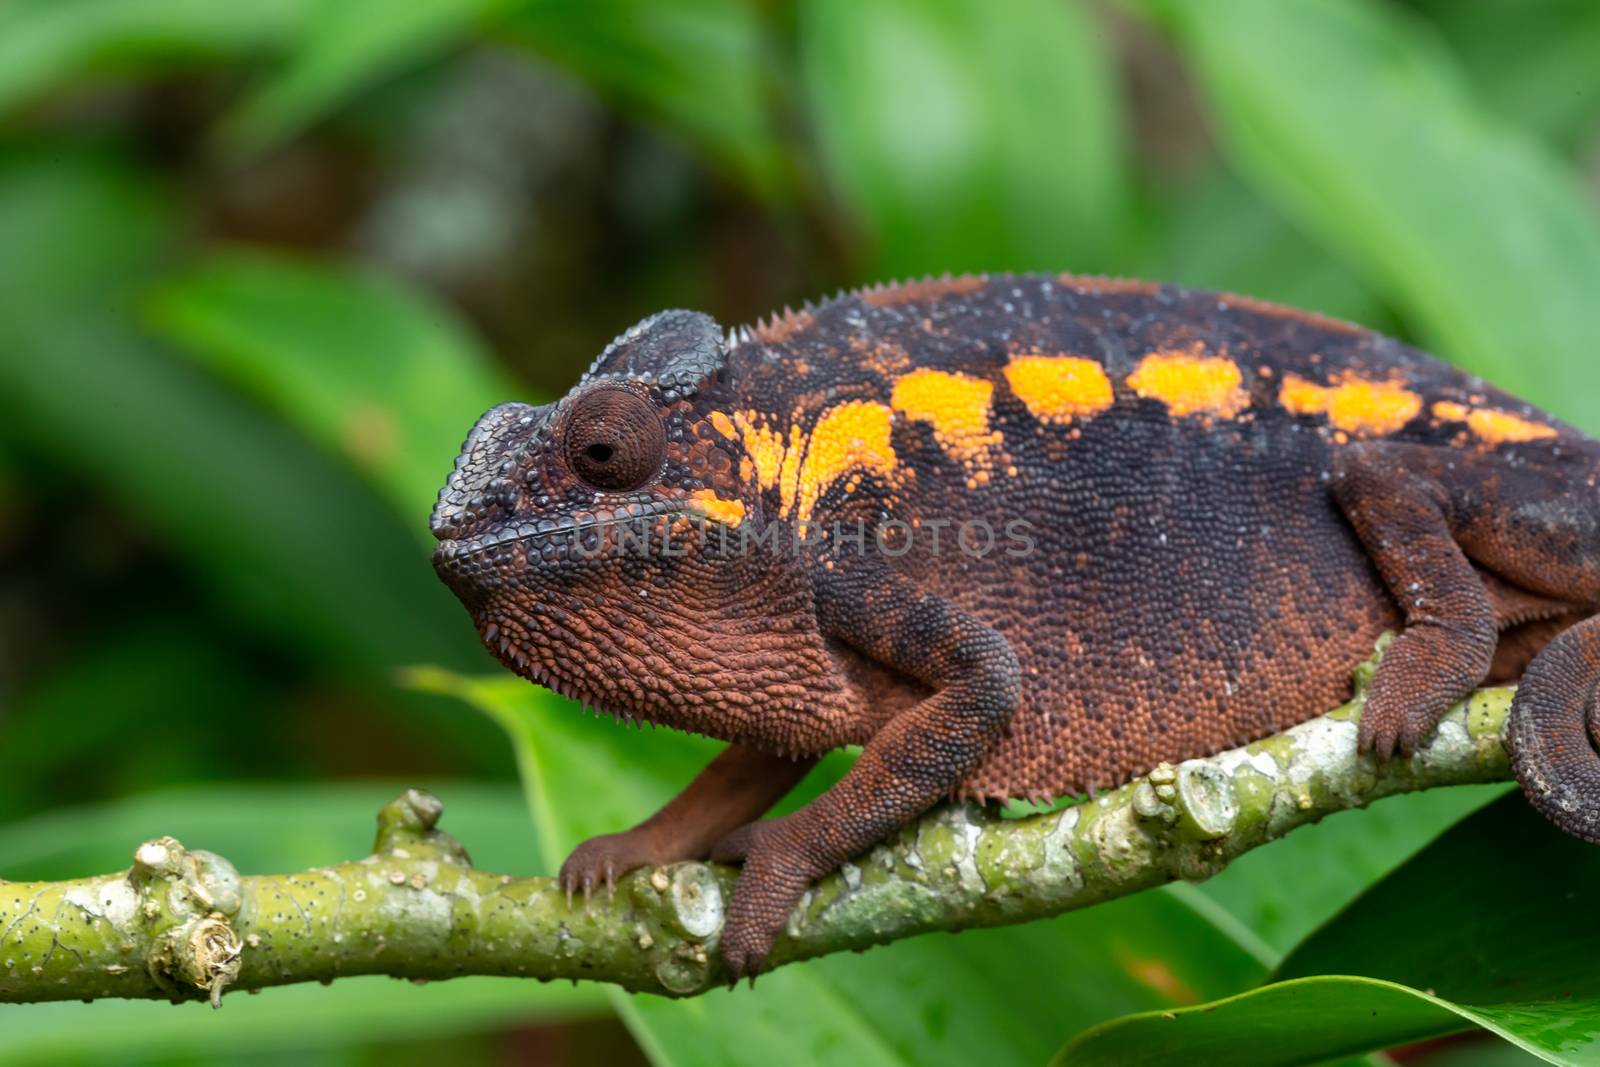 An earth-colored chameleon on a branch by 25ehaag6